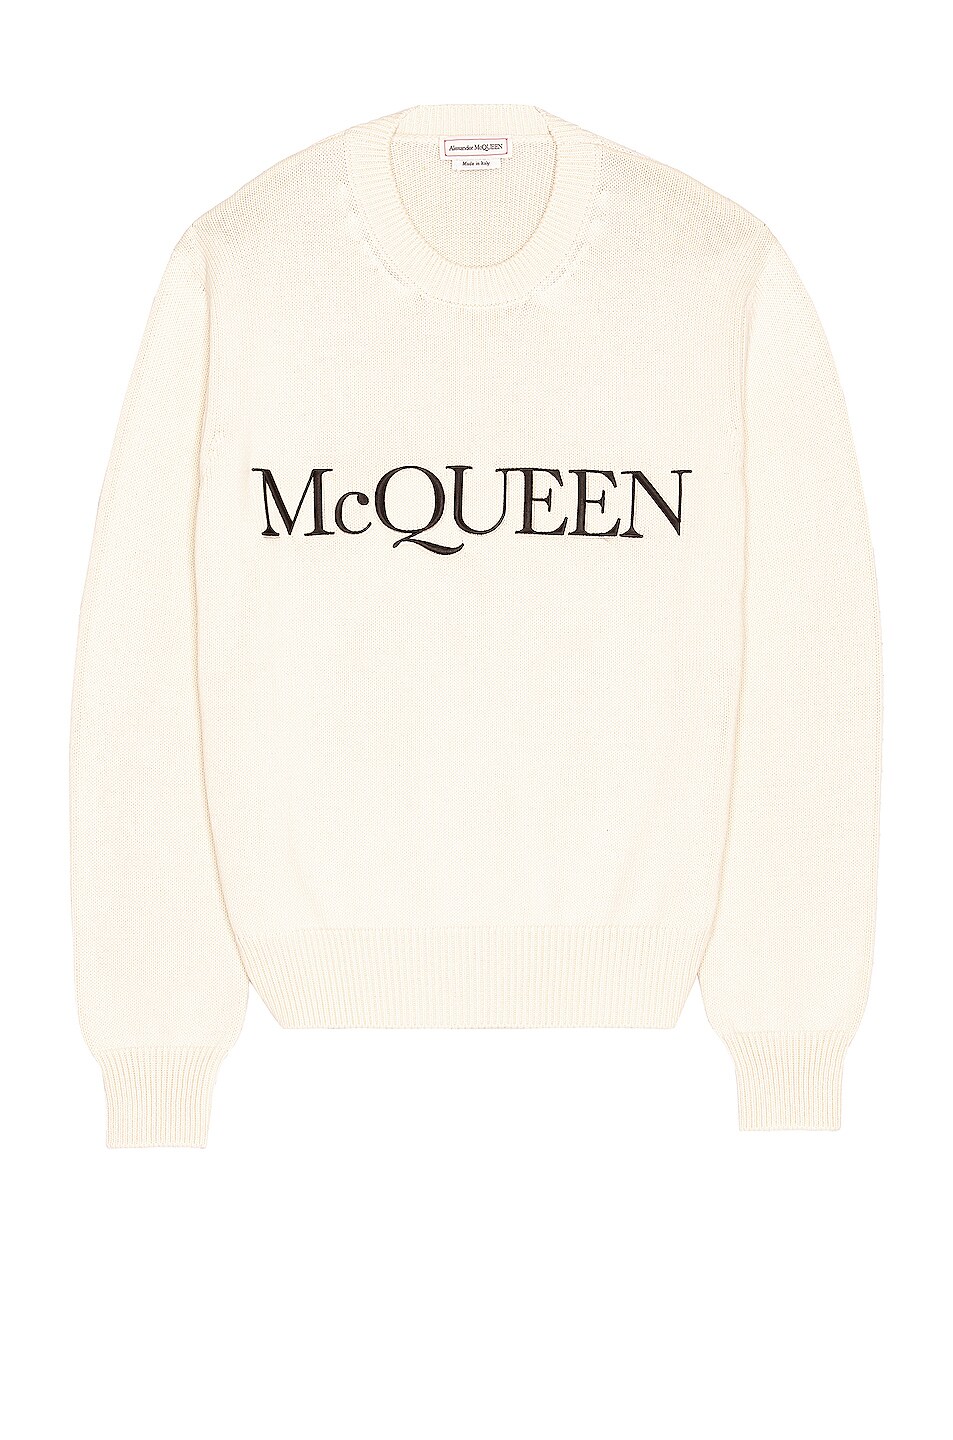 Image 1 of Alexander McQueen Crew Neck Pullover in Ivory, Black, & White